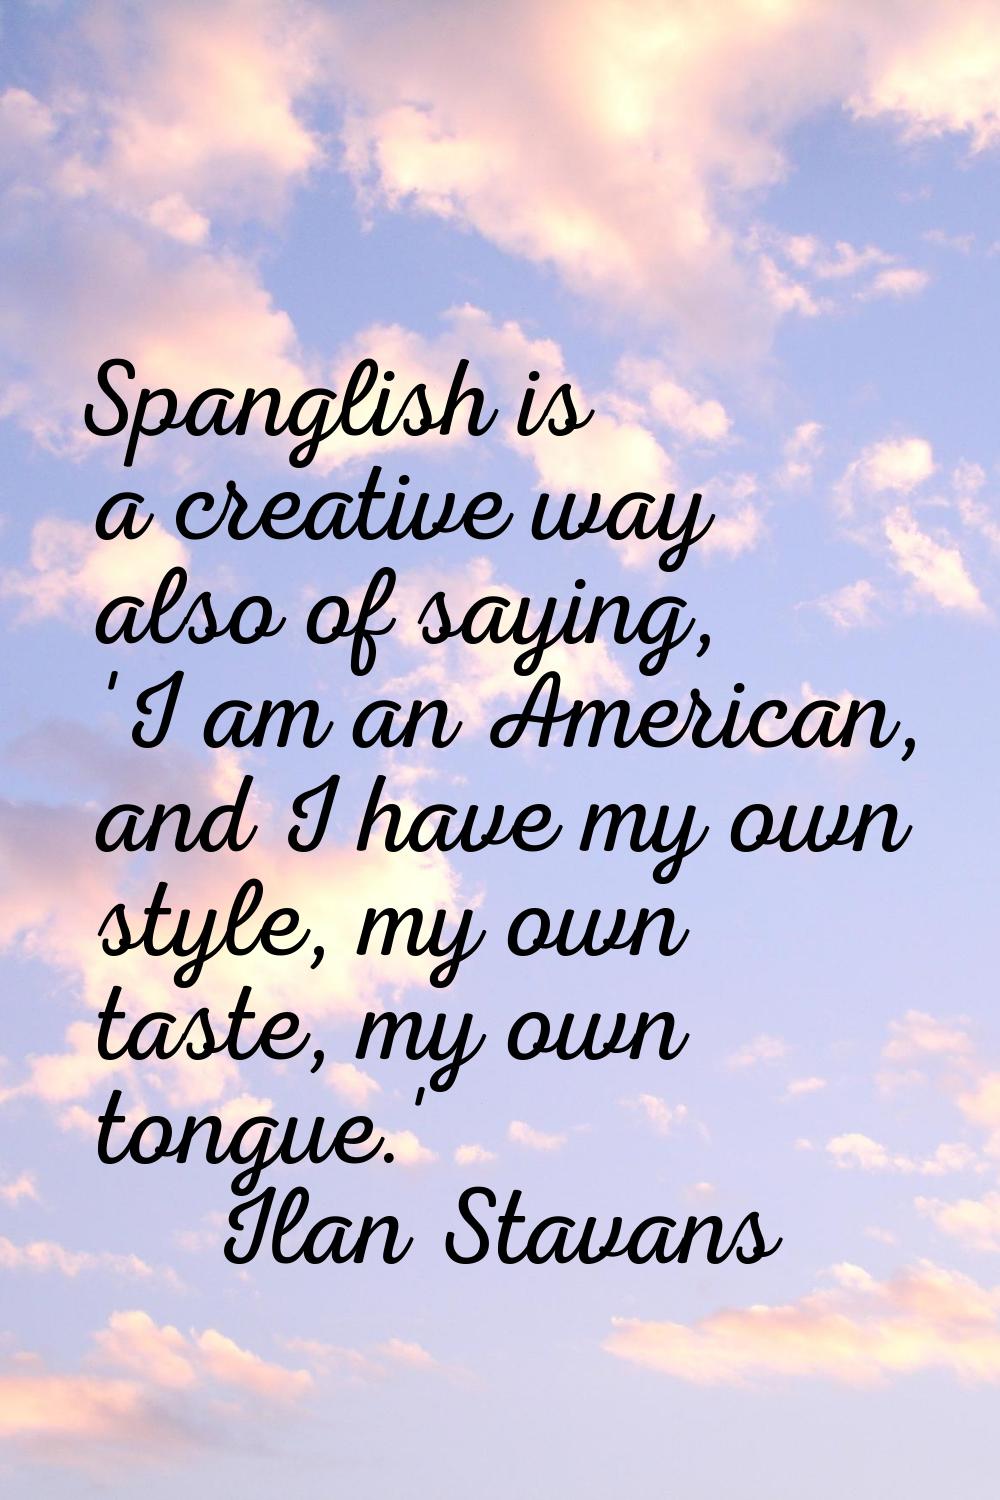 Spanglish is a creative way also of saying, 'I am an American, and I have my own style, my own tast